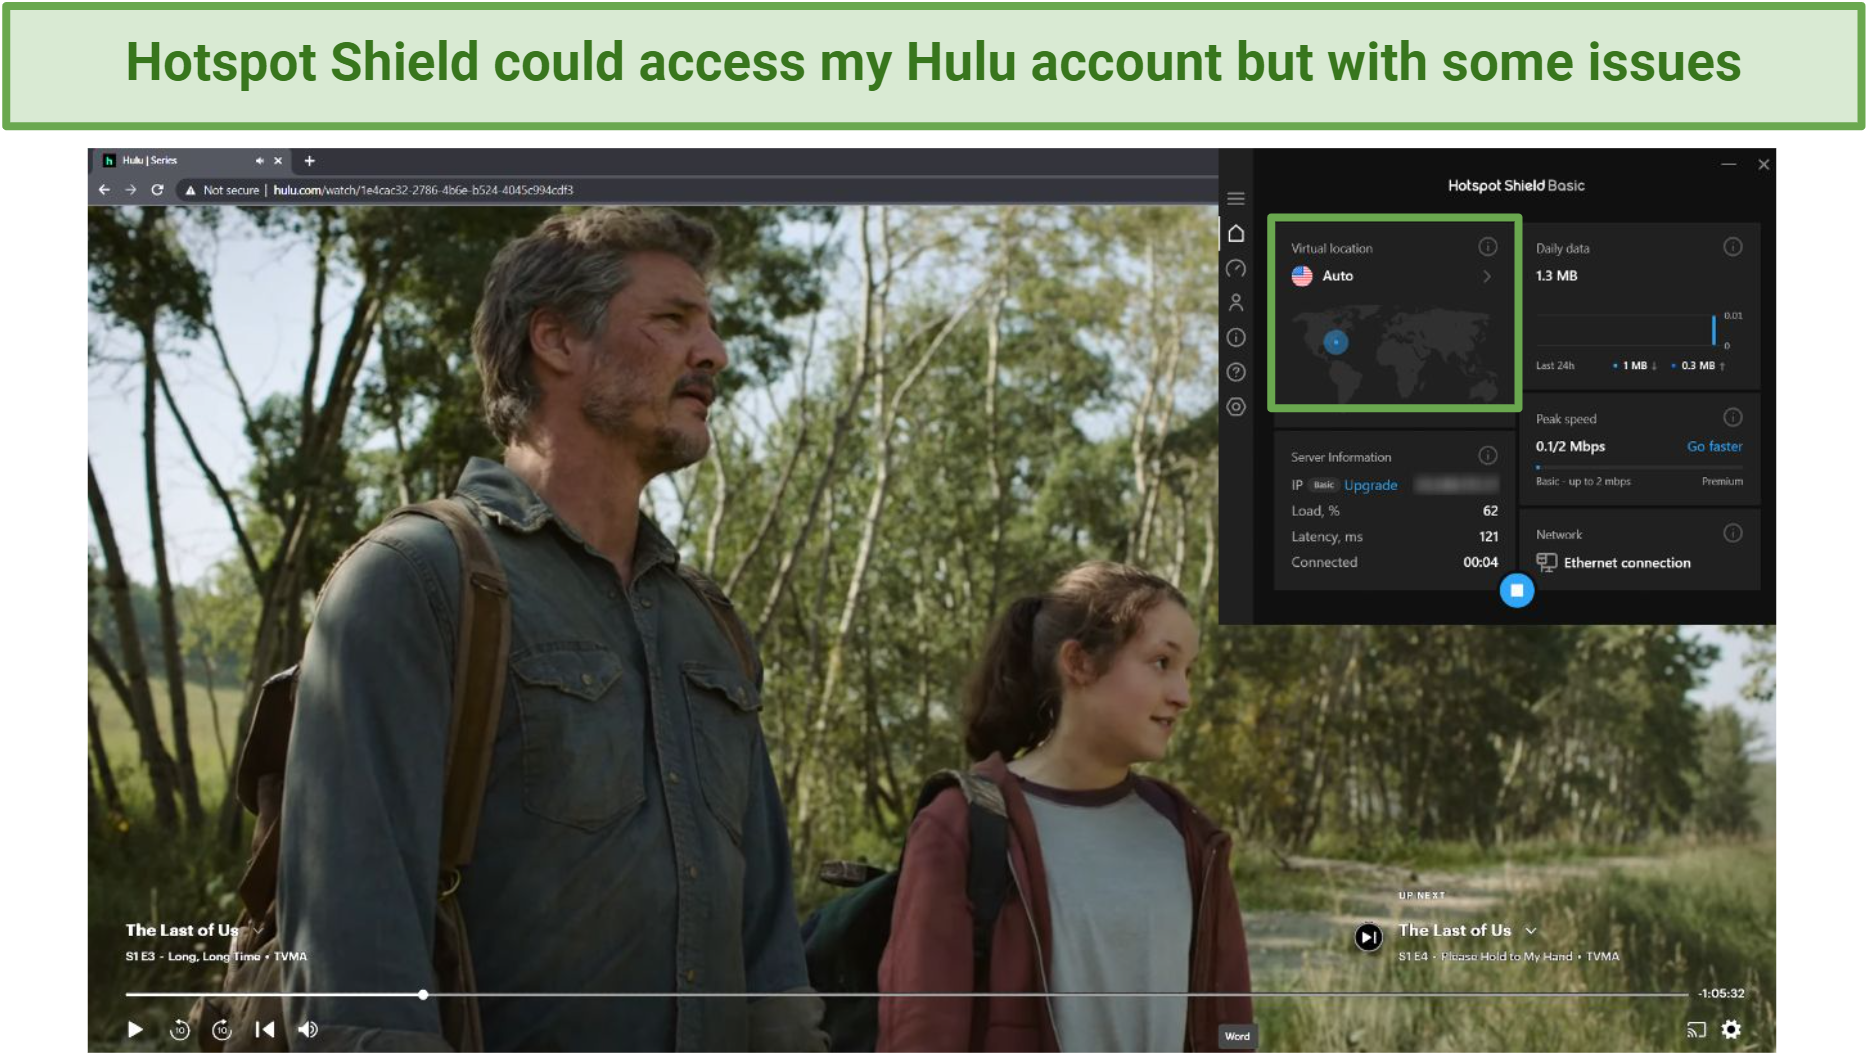 Screenshot of Last of Us on Hulu accessed by Hotspot Shield